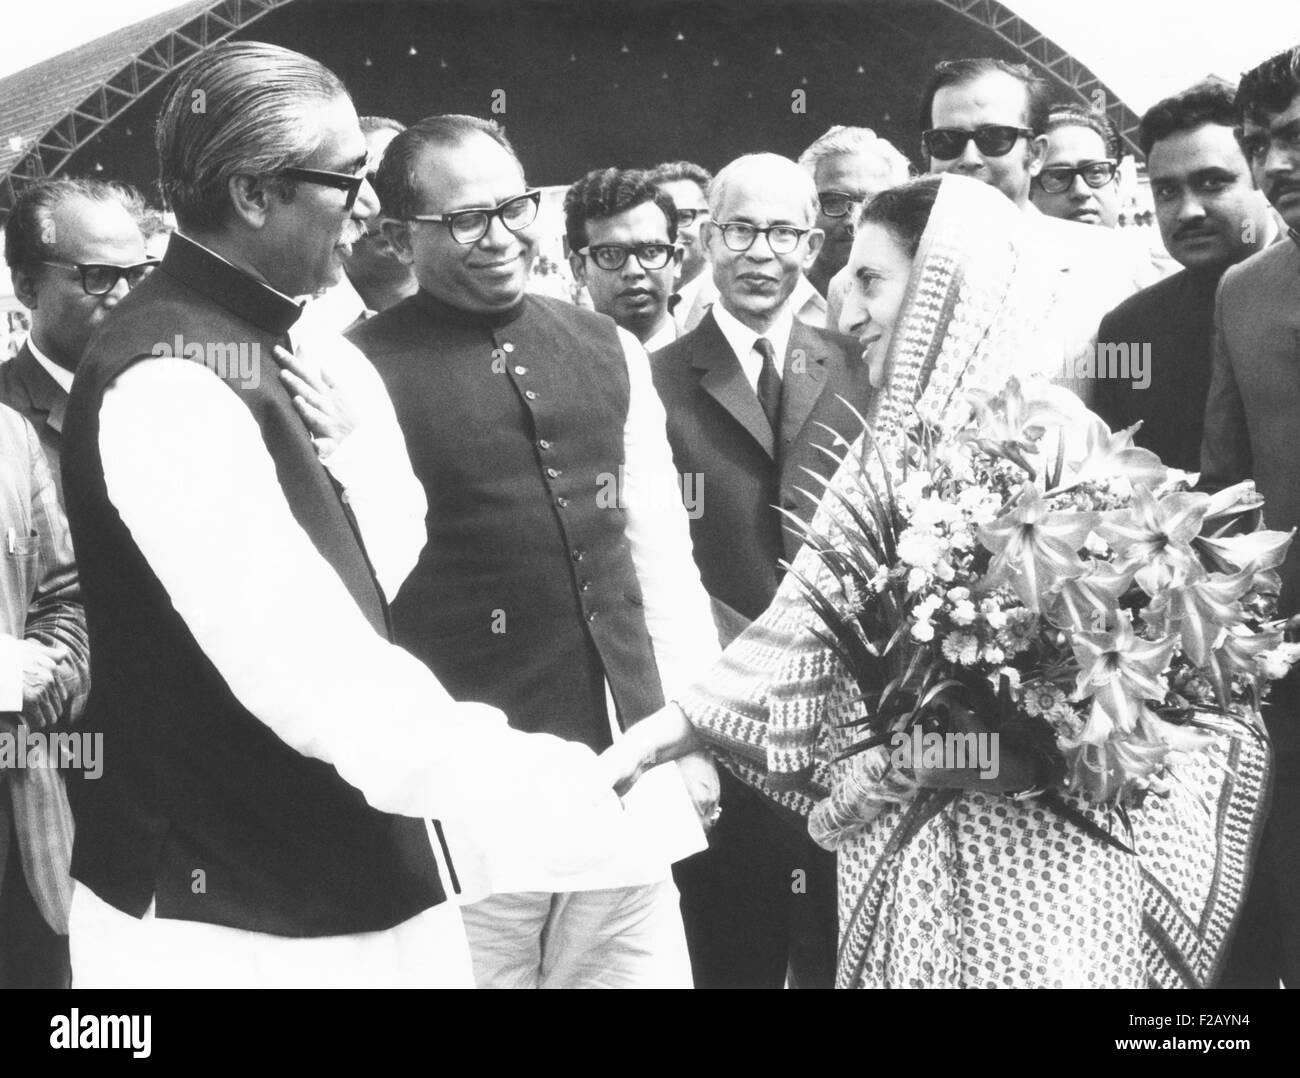 Sheik Mujibur Rahman, Premier of Bangladesh, with Indian PM Indira Gandhi. Dhaka (Dacca), March 19, 1972. During this visit, Rahman and Gandhi signed a 25 year Treaty of Friendship and Mutual Security. Bangladesh, newly independent from West Pakistan, won its independence during the Bangladesh Liberation War in 1971. (CSU 2015 9 734) Stock Photo